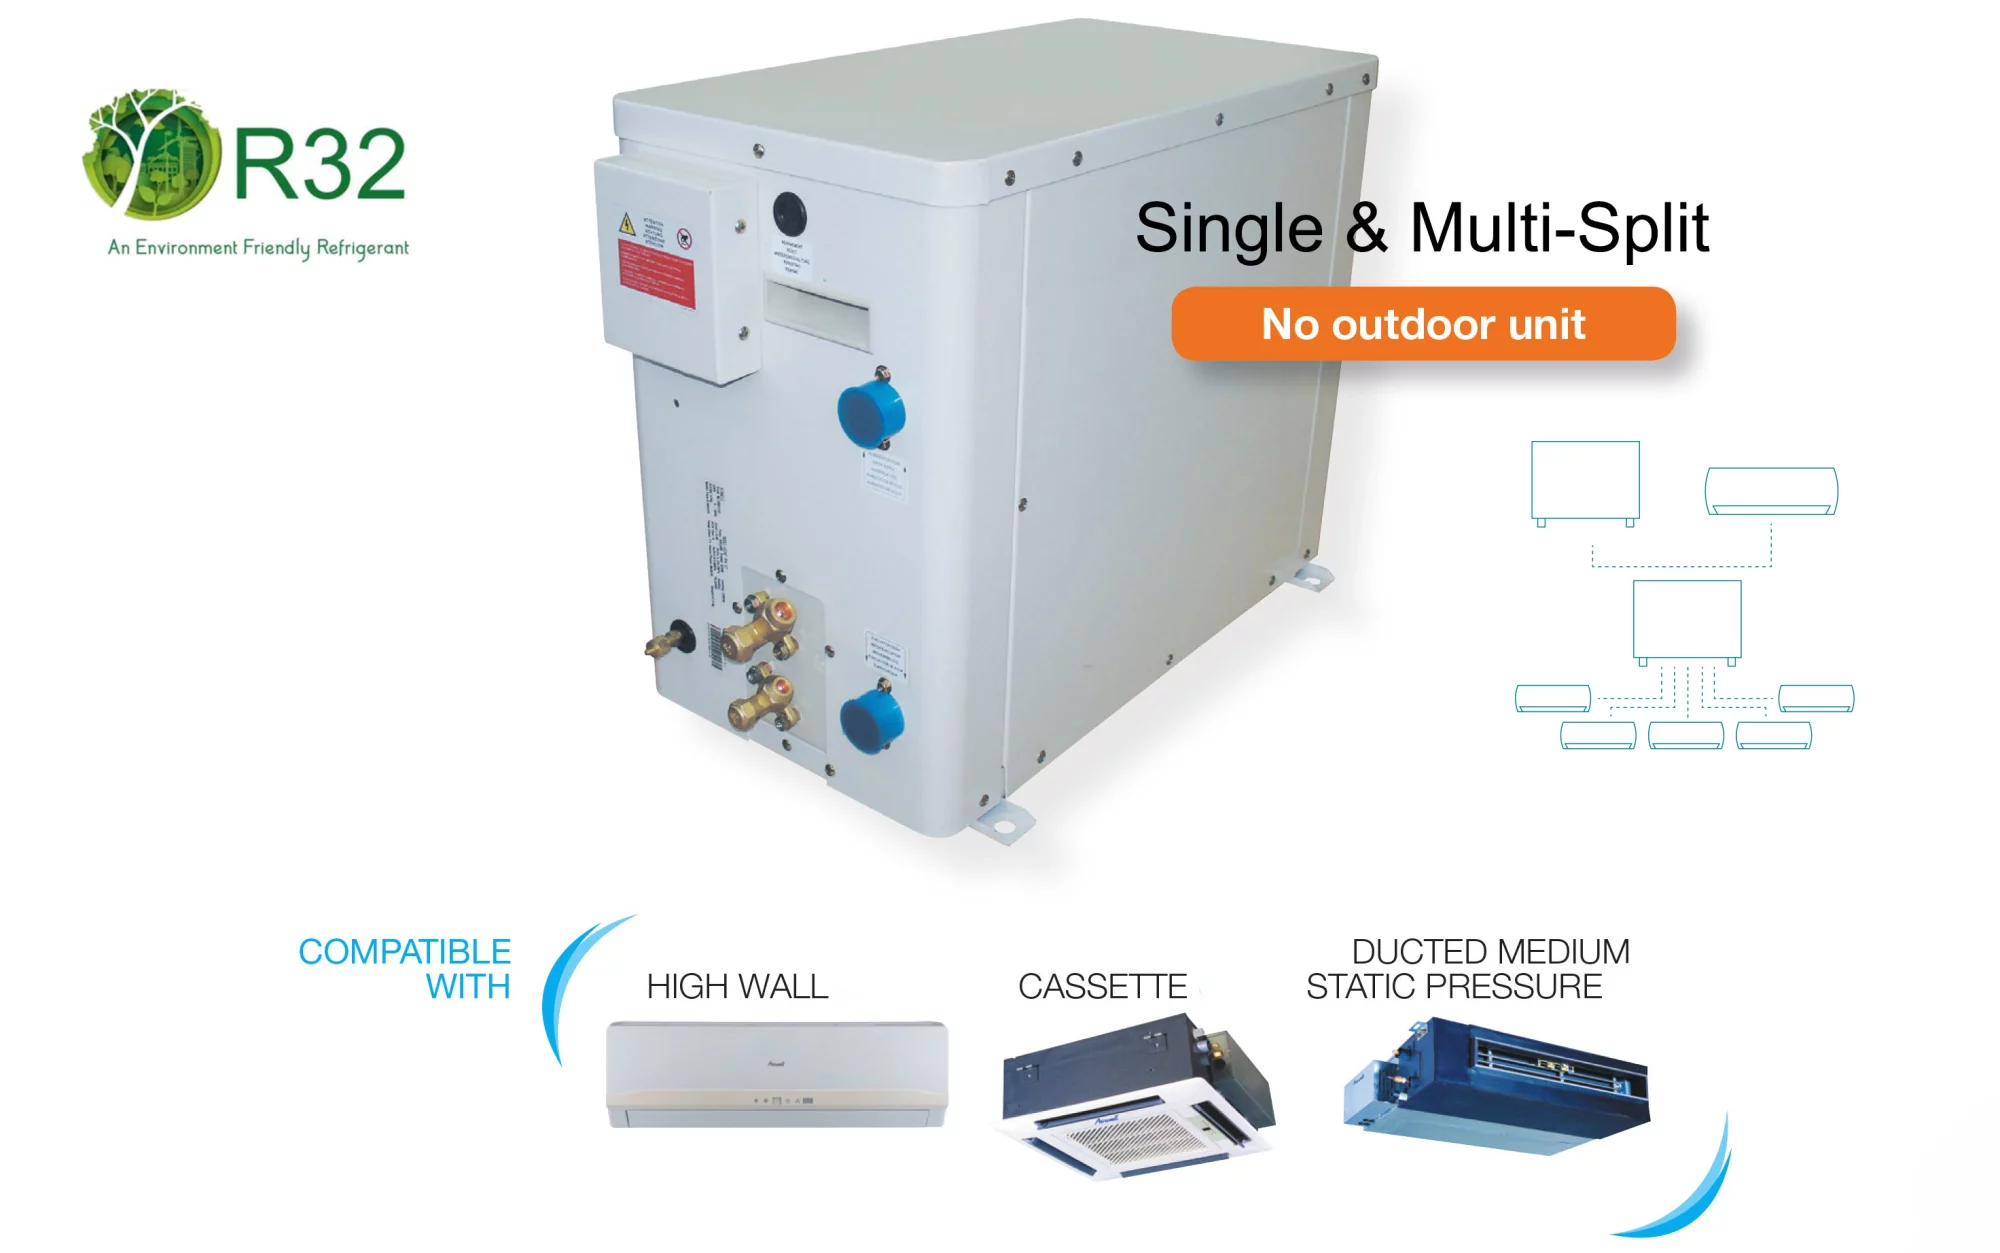 image with a new water cooled air conditioning system with R32 evironment friendly refrigerant, single & Multi Split no outdoor unit compatible with high wall unit, cassette unit and ducted medium static pressure air conditioning unit.